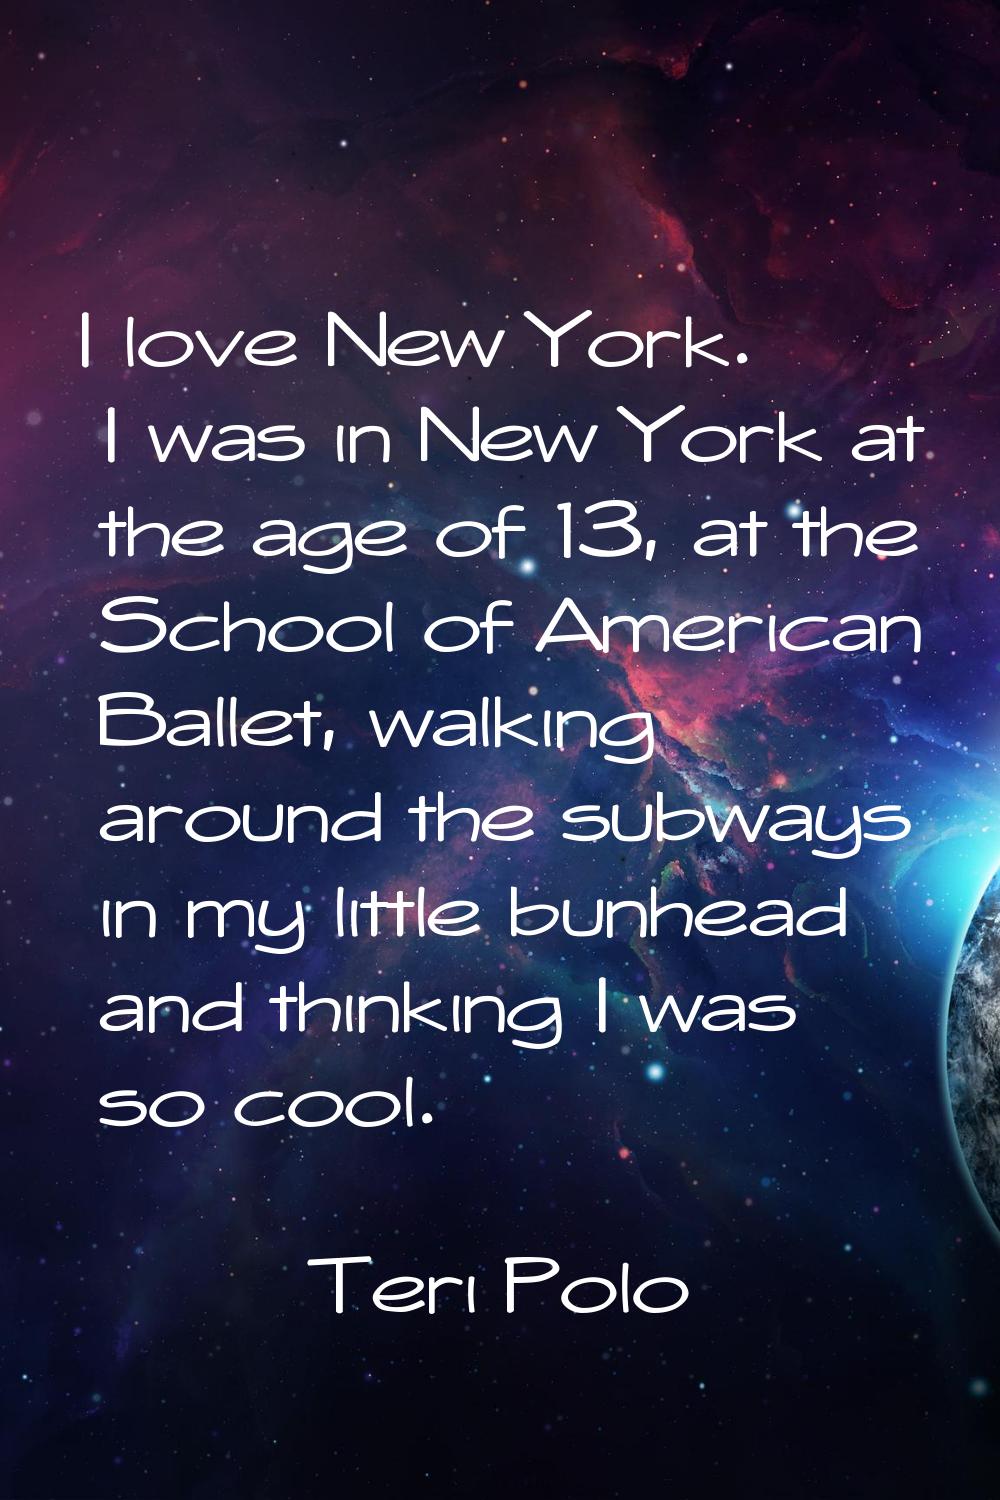 I love New York. I was in New York at the age of 13, at the School of American Ballet, walking arou